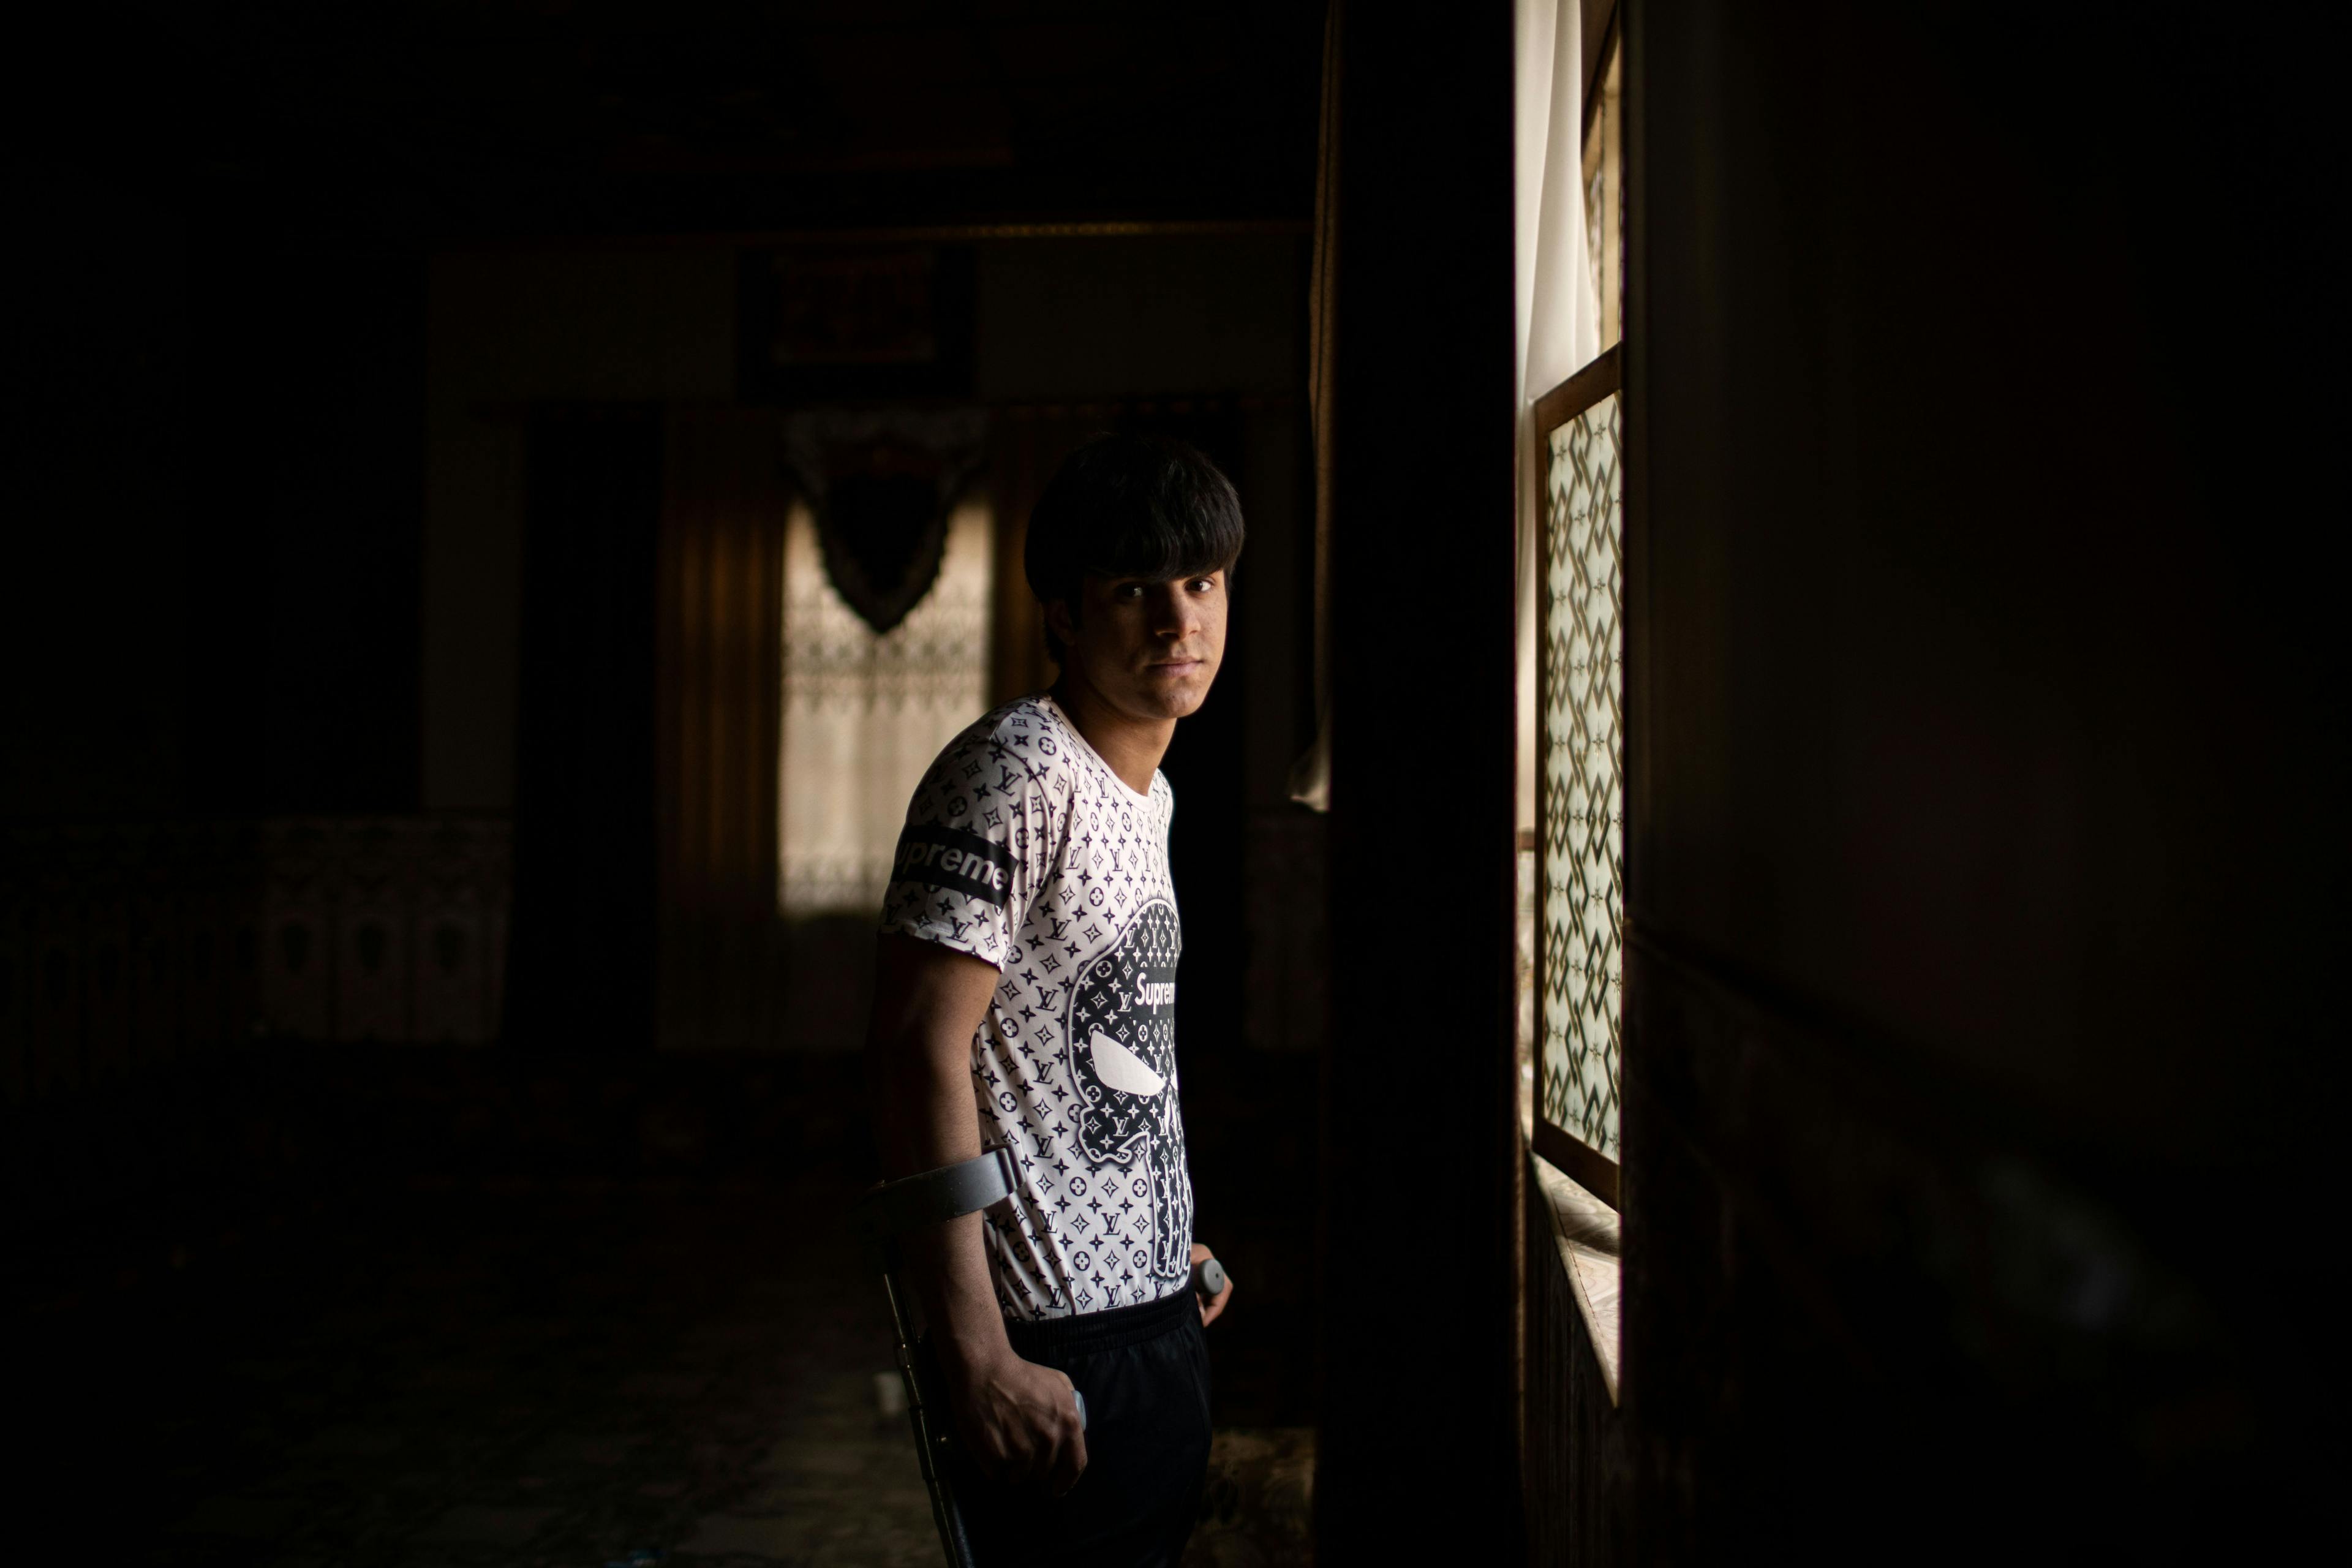 On 2 March 2022 in Iraq, a portrait of 18-year-old Muqtada made inside his home in Basra. When he was 16, he was injured by a landmine explosion close to the border with Iran and lost his right foot and part of his right leg. 